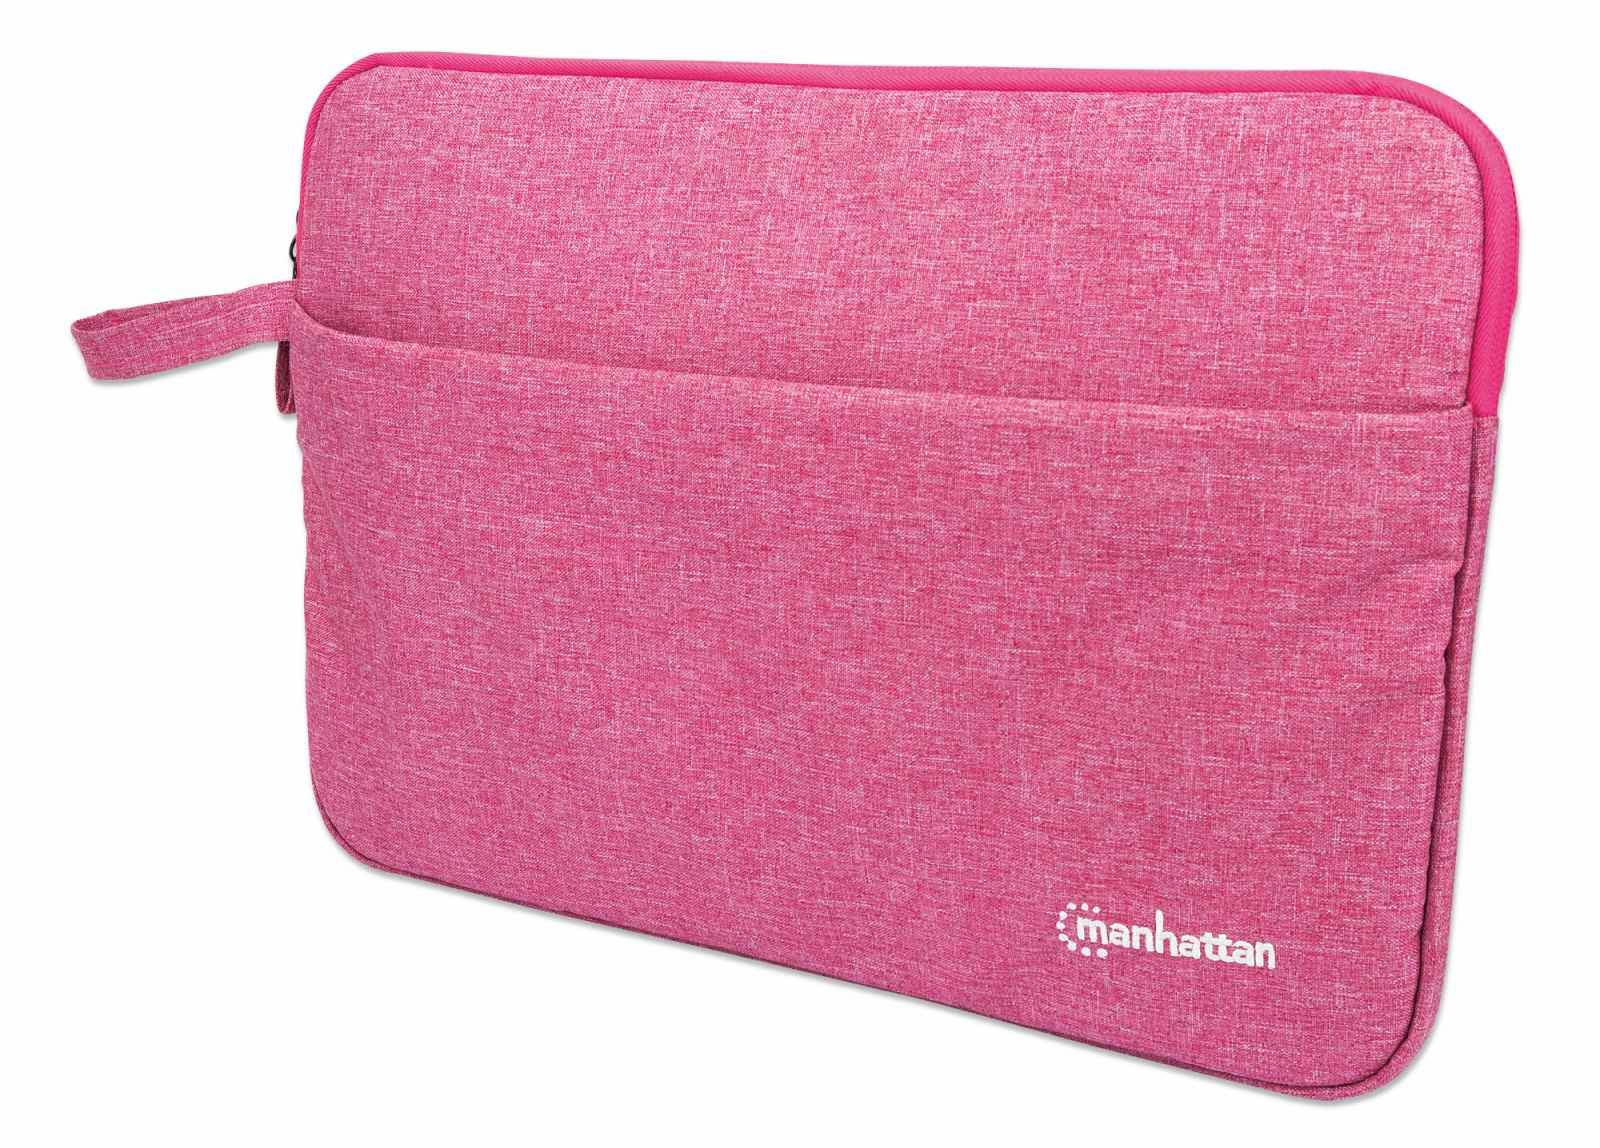 Manhattan Seattle Laptop Sleeve 14.5", Coral, Padded, Extra Soft Internal Cushioning, Main Compartment with double zips, Zippered Front Pocket, Carry Loop, Water Resistant and Durable, Notebook Slipcase, Three Year Warranty